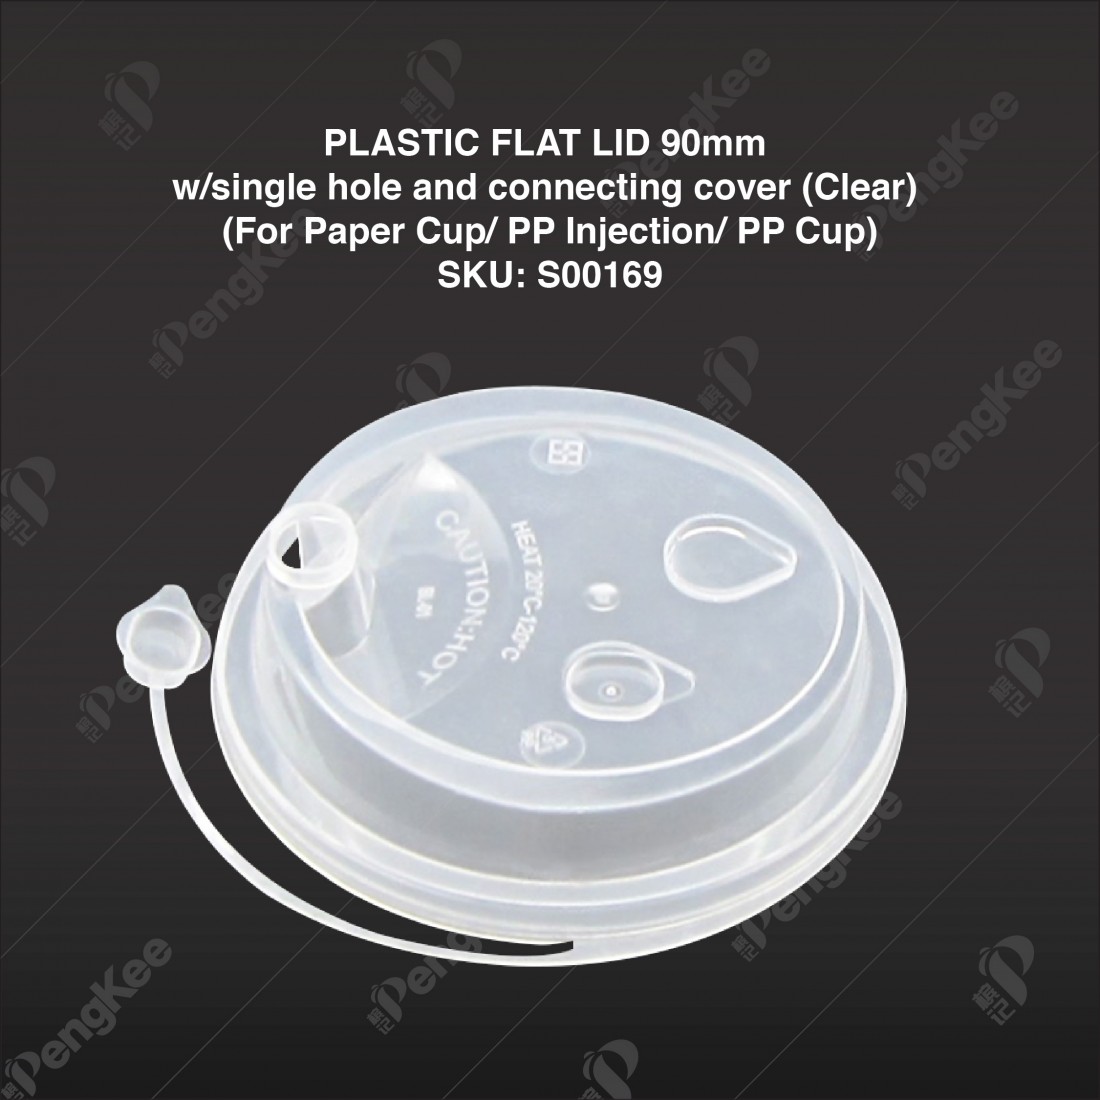 PLASTIC FLAT LID 90mm w/single hole and connecting cover (Clear) (For Paper Cup/ PP Injection/ PP Cup)